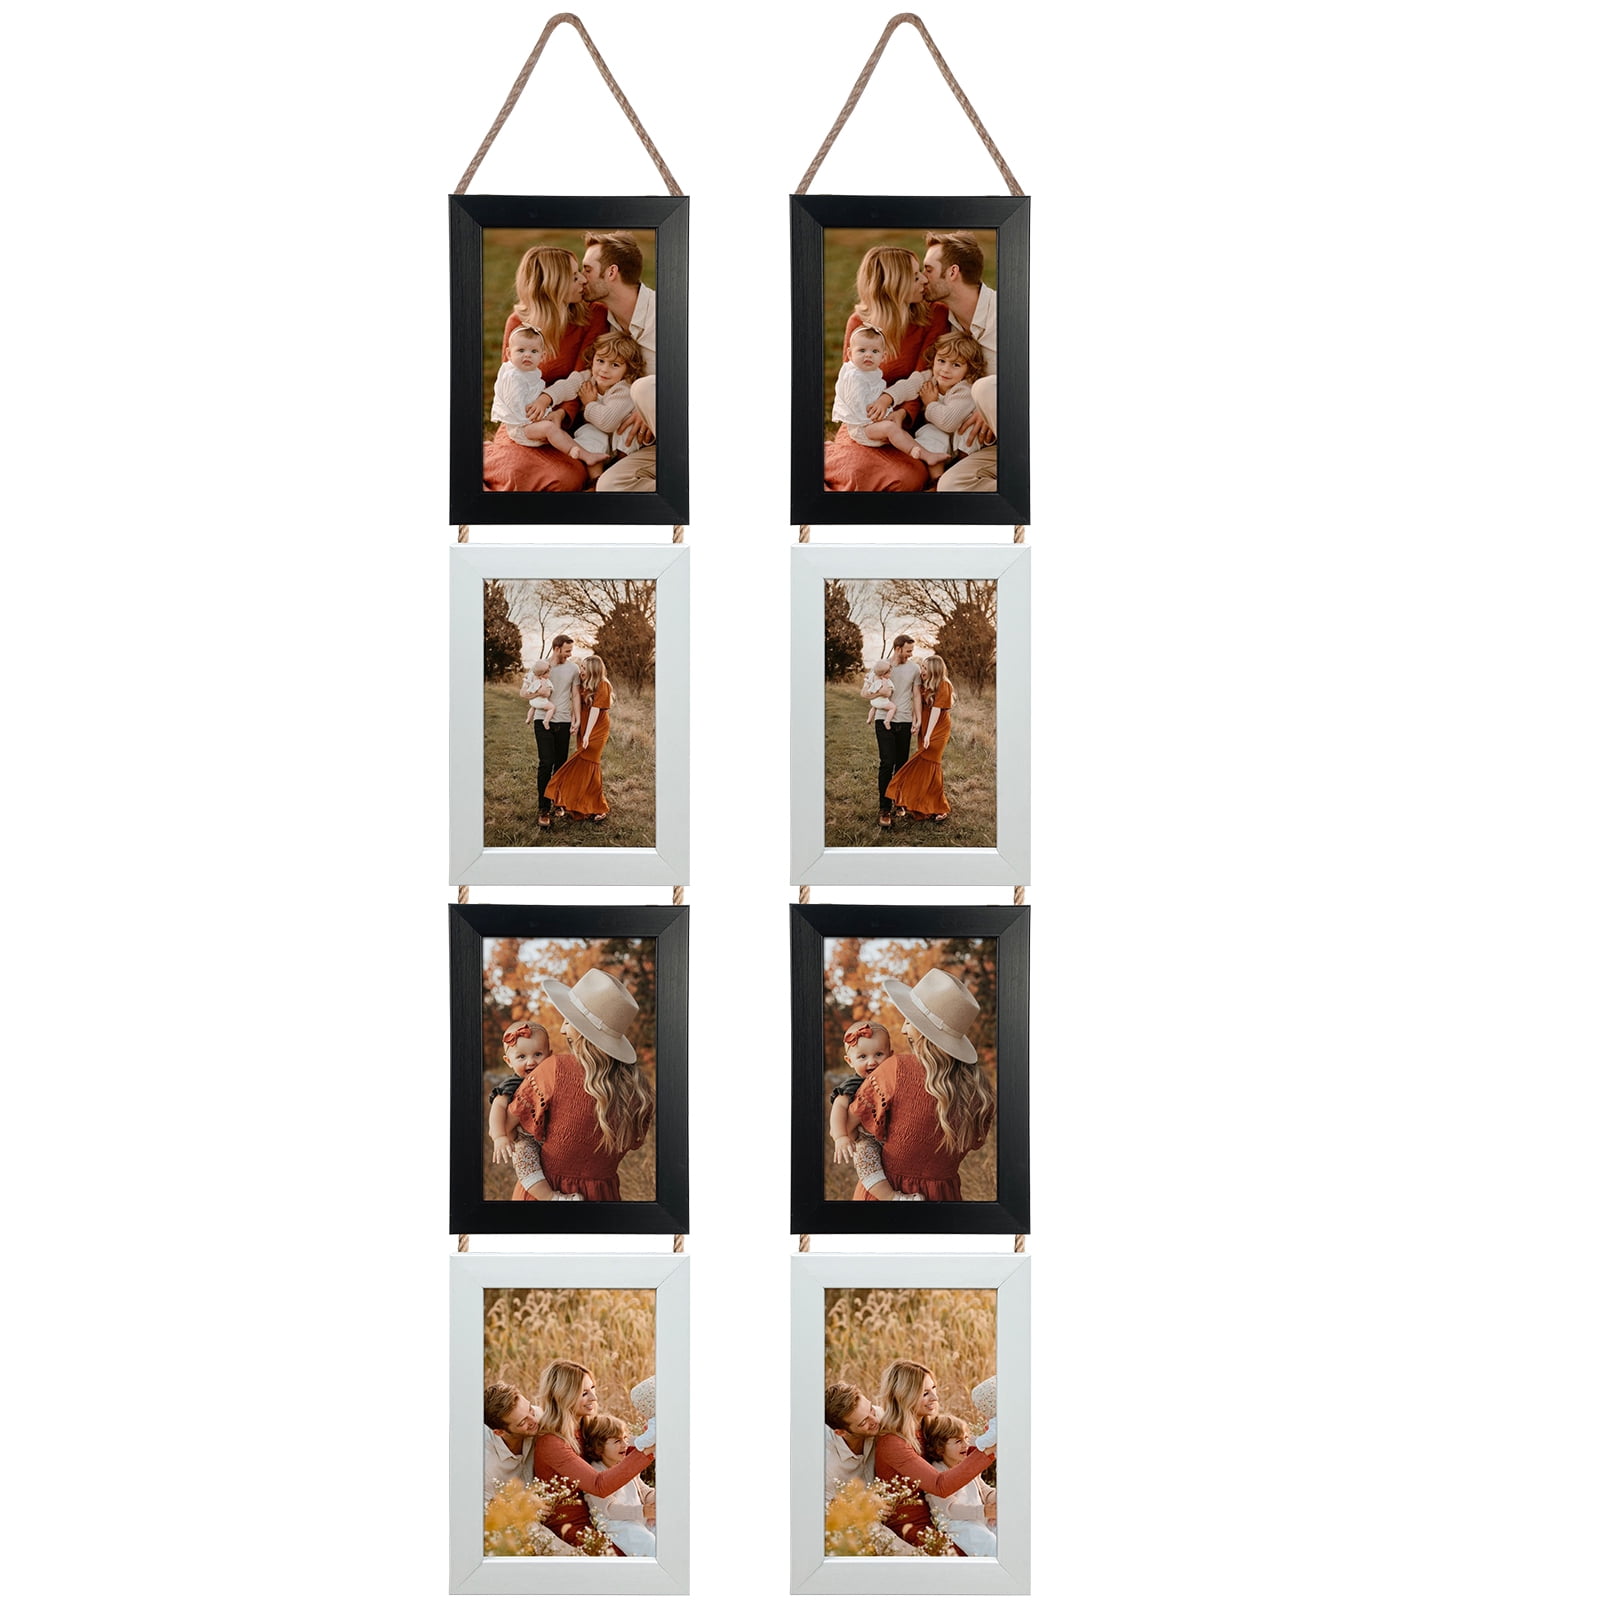 Yirtree Hanging Instant Photo Display Decorative Wall Hanging String with  Clips, Stick and Hang Photo Wall Decor, Wall Hanging Pictures Display for  Home, Dormitory and Cafe Decoration 